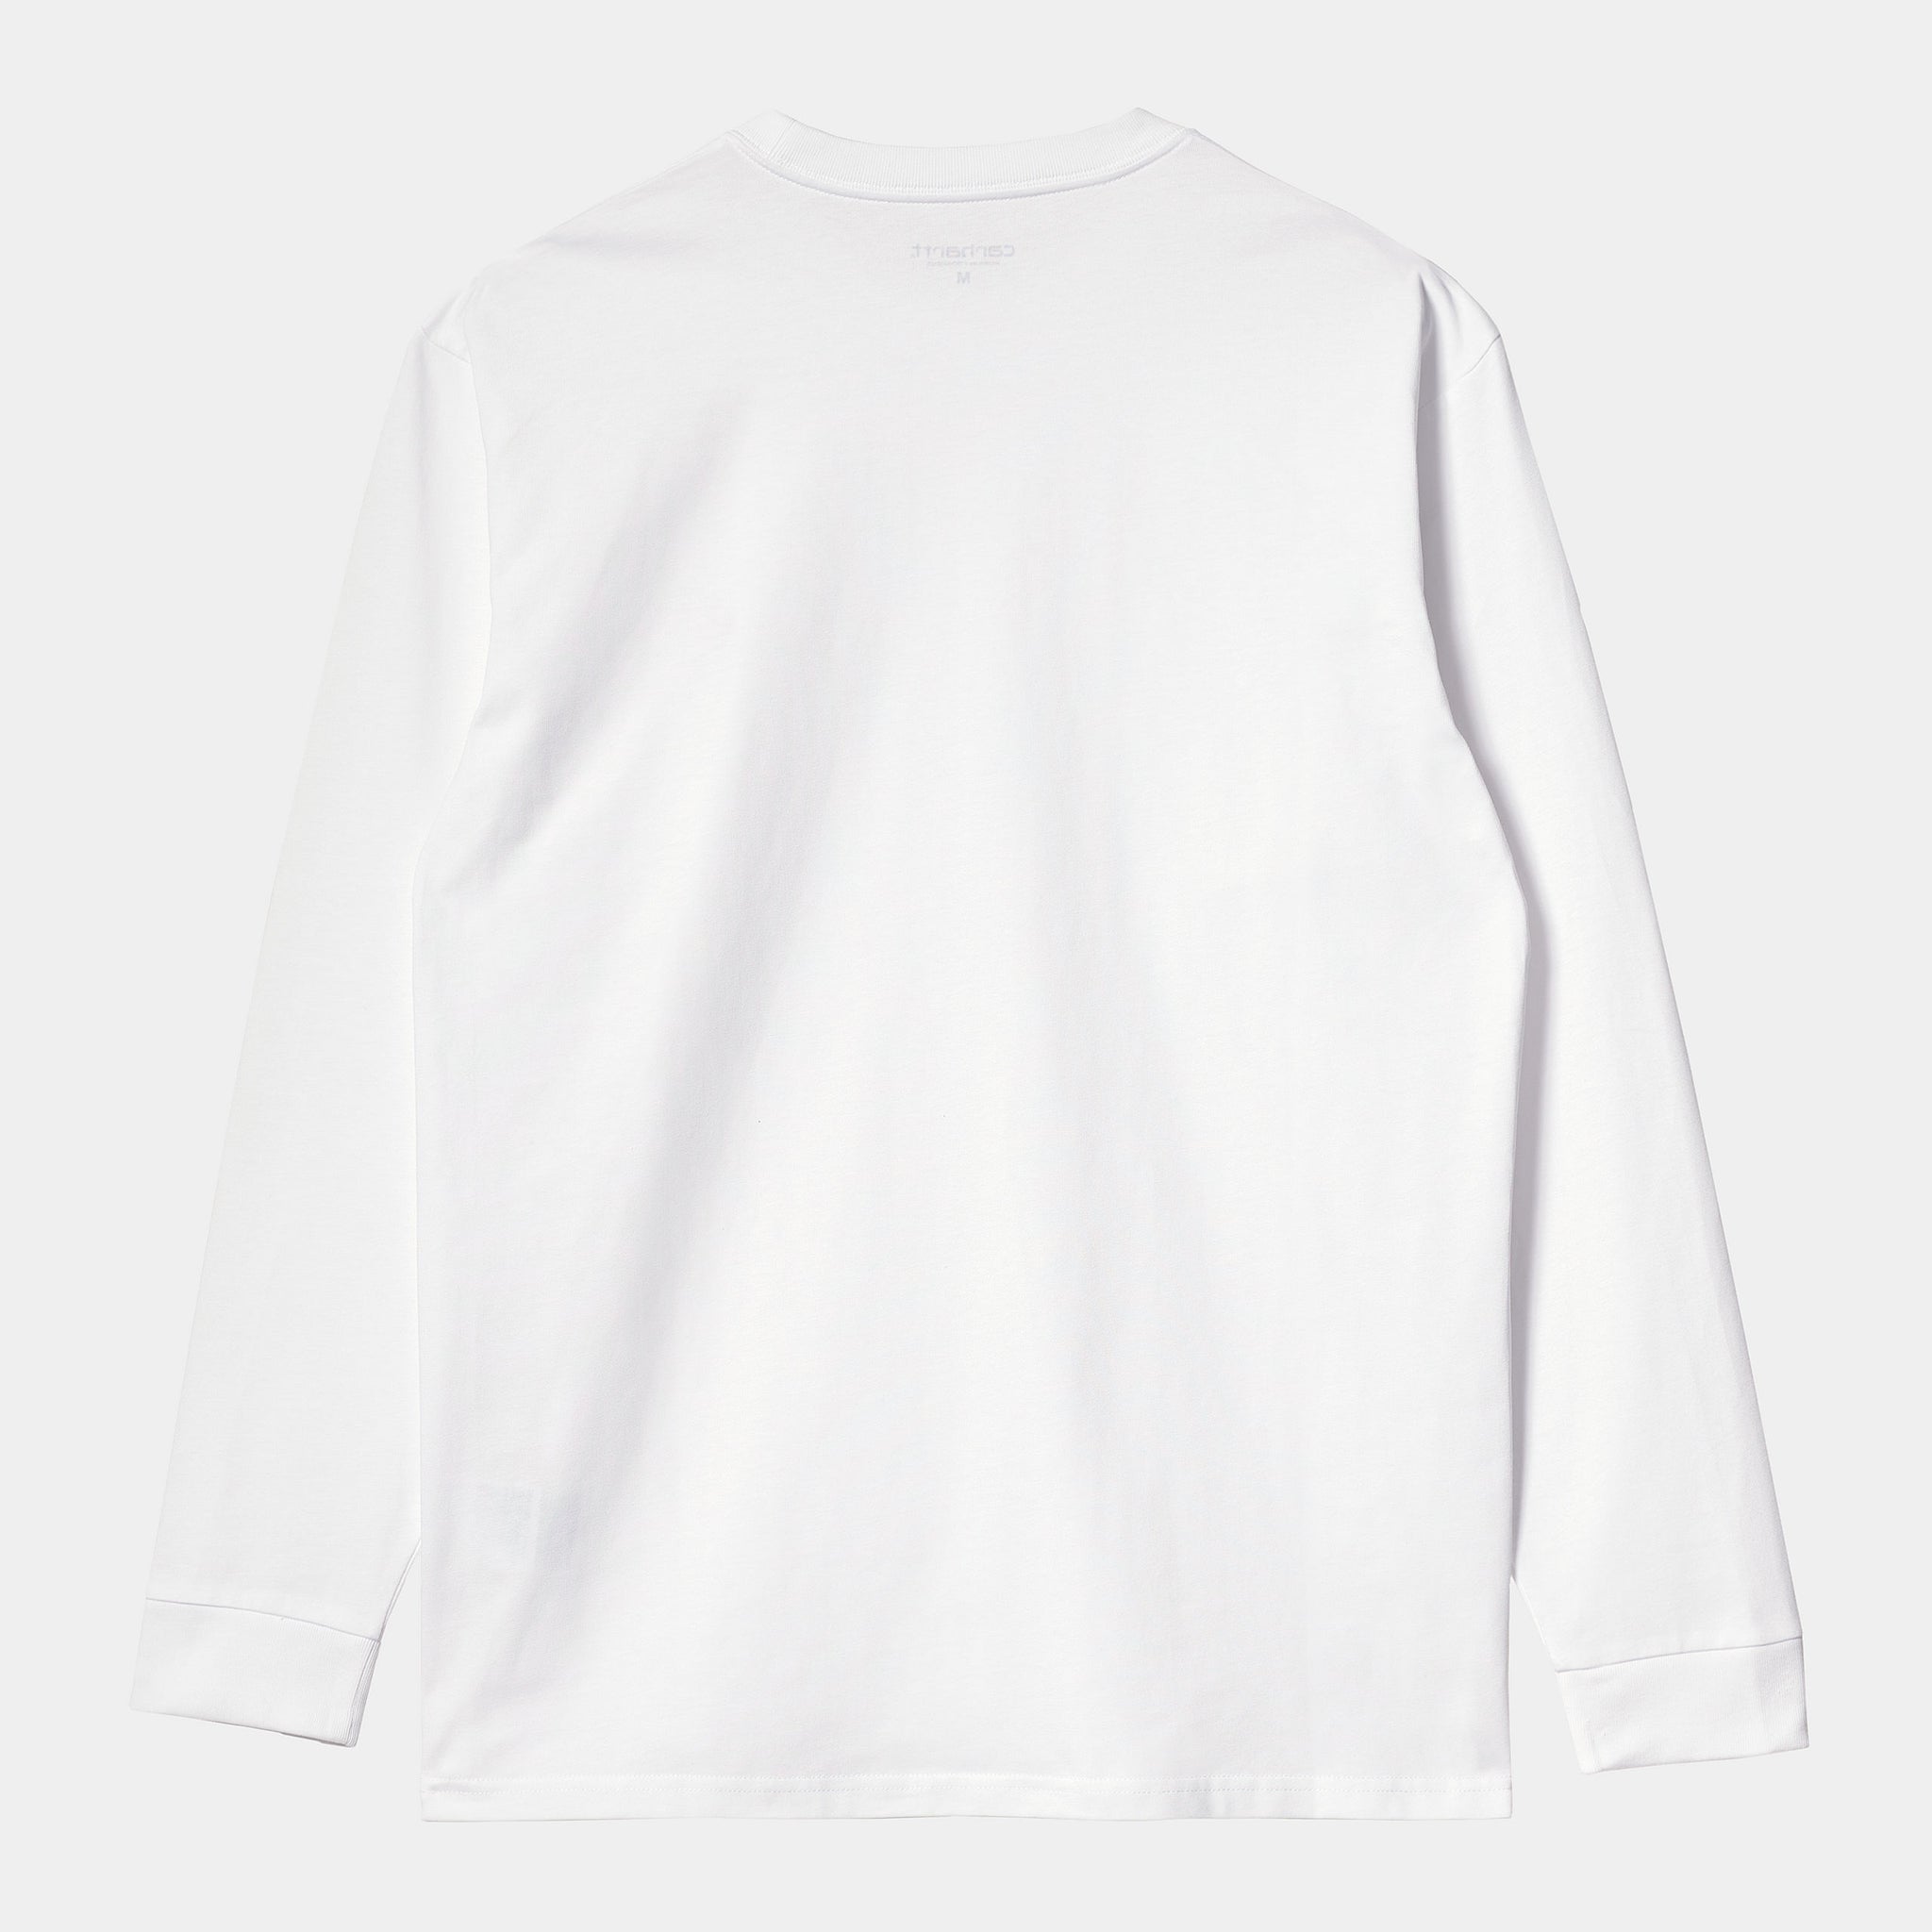 L/s Chase T-shirt 100% Cotton Combed Single Jersey, 235 G/m² (White / Gold)